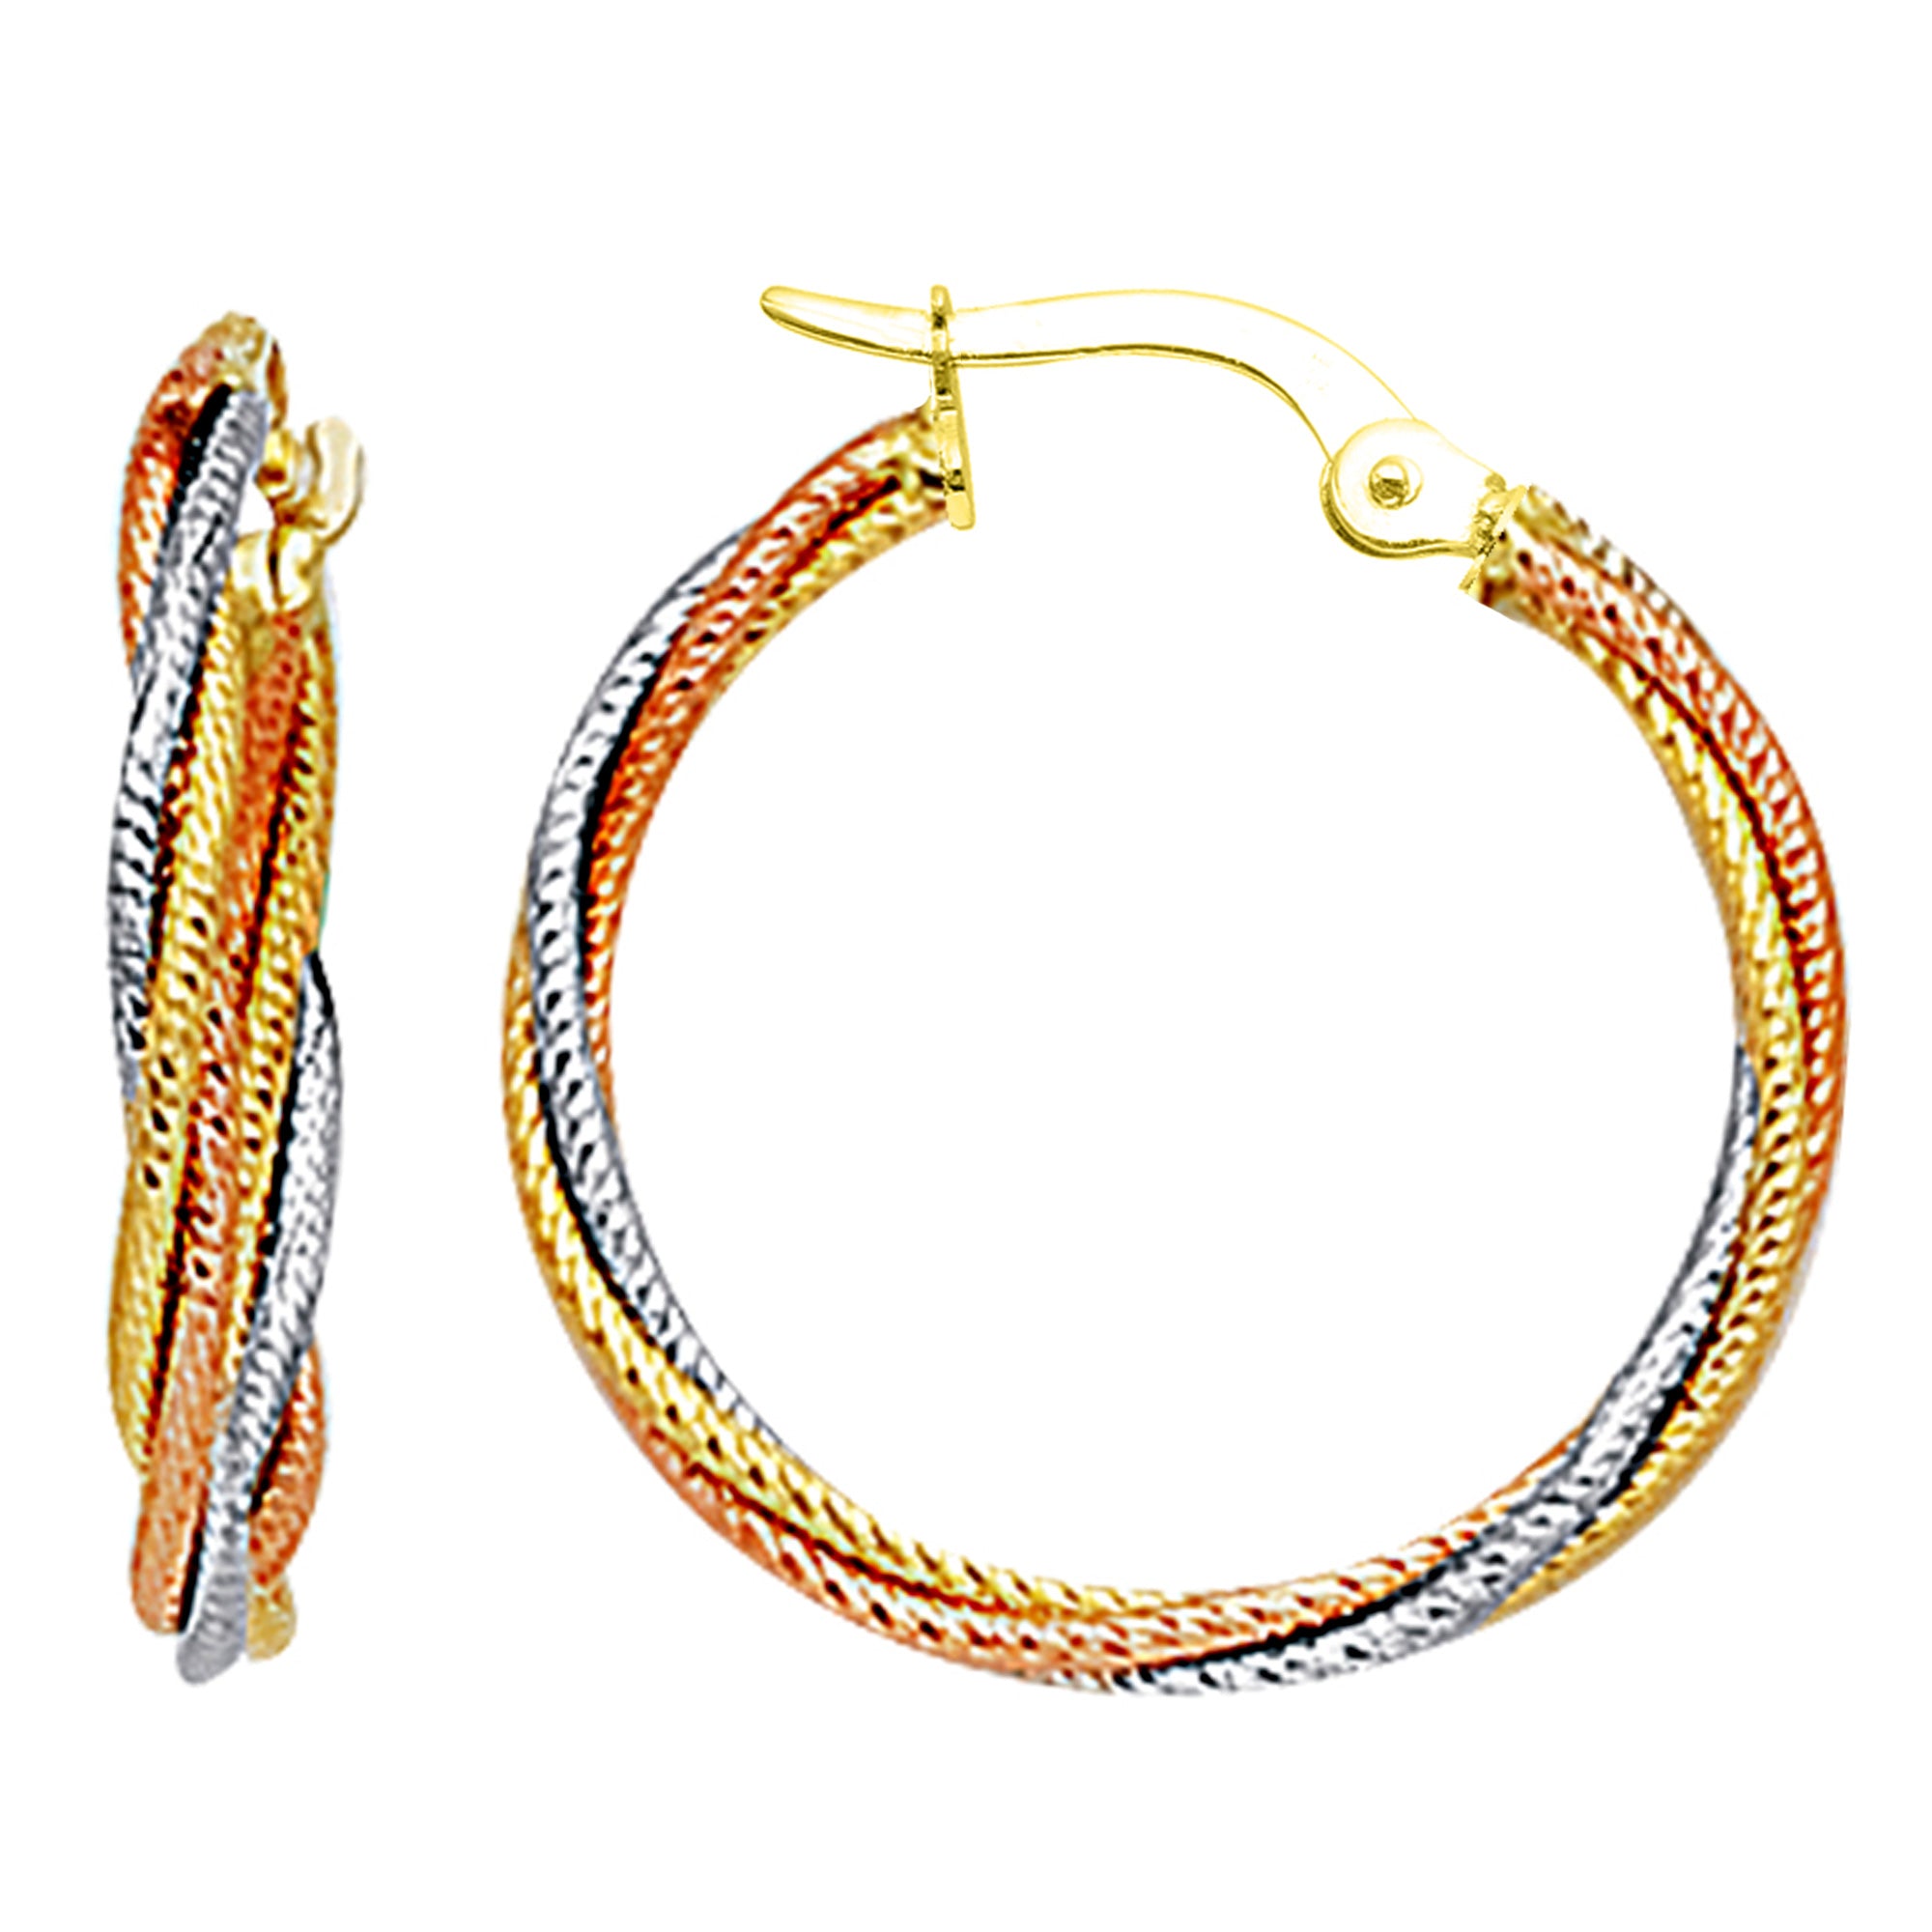 10k 3 Tone White, Yellow And Rose Gold Triple Braided Cables Round Hoop Earrings, Diameter 23mm fine designer jewelry for men and women